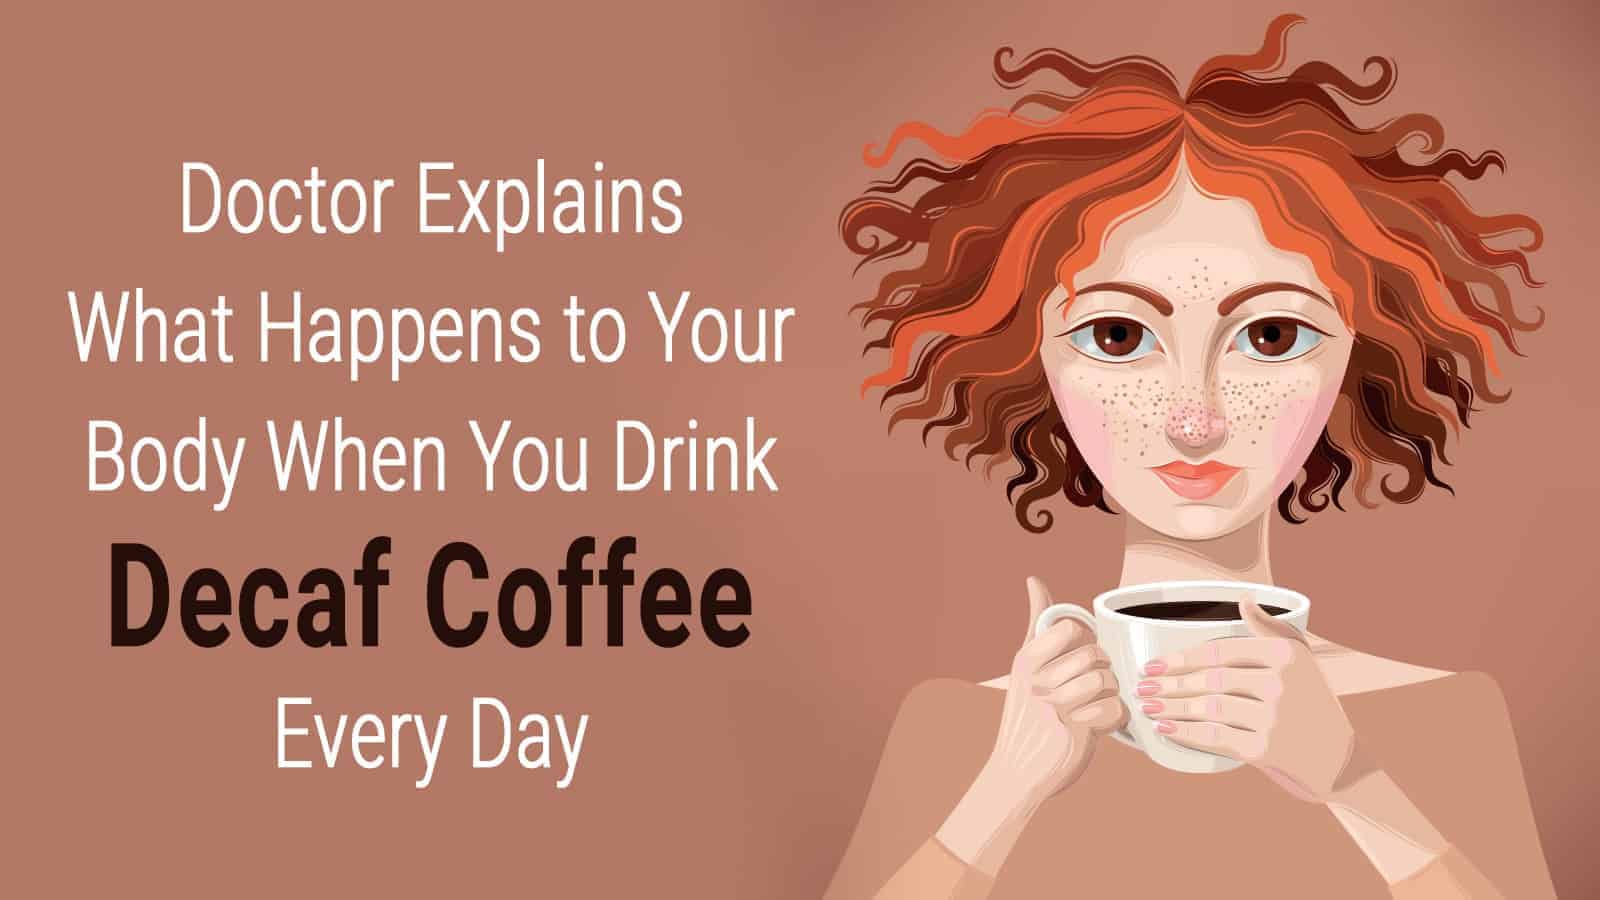 Doctor explains what happens to your body when you drink decaf coffee every day